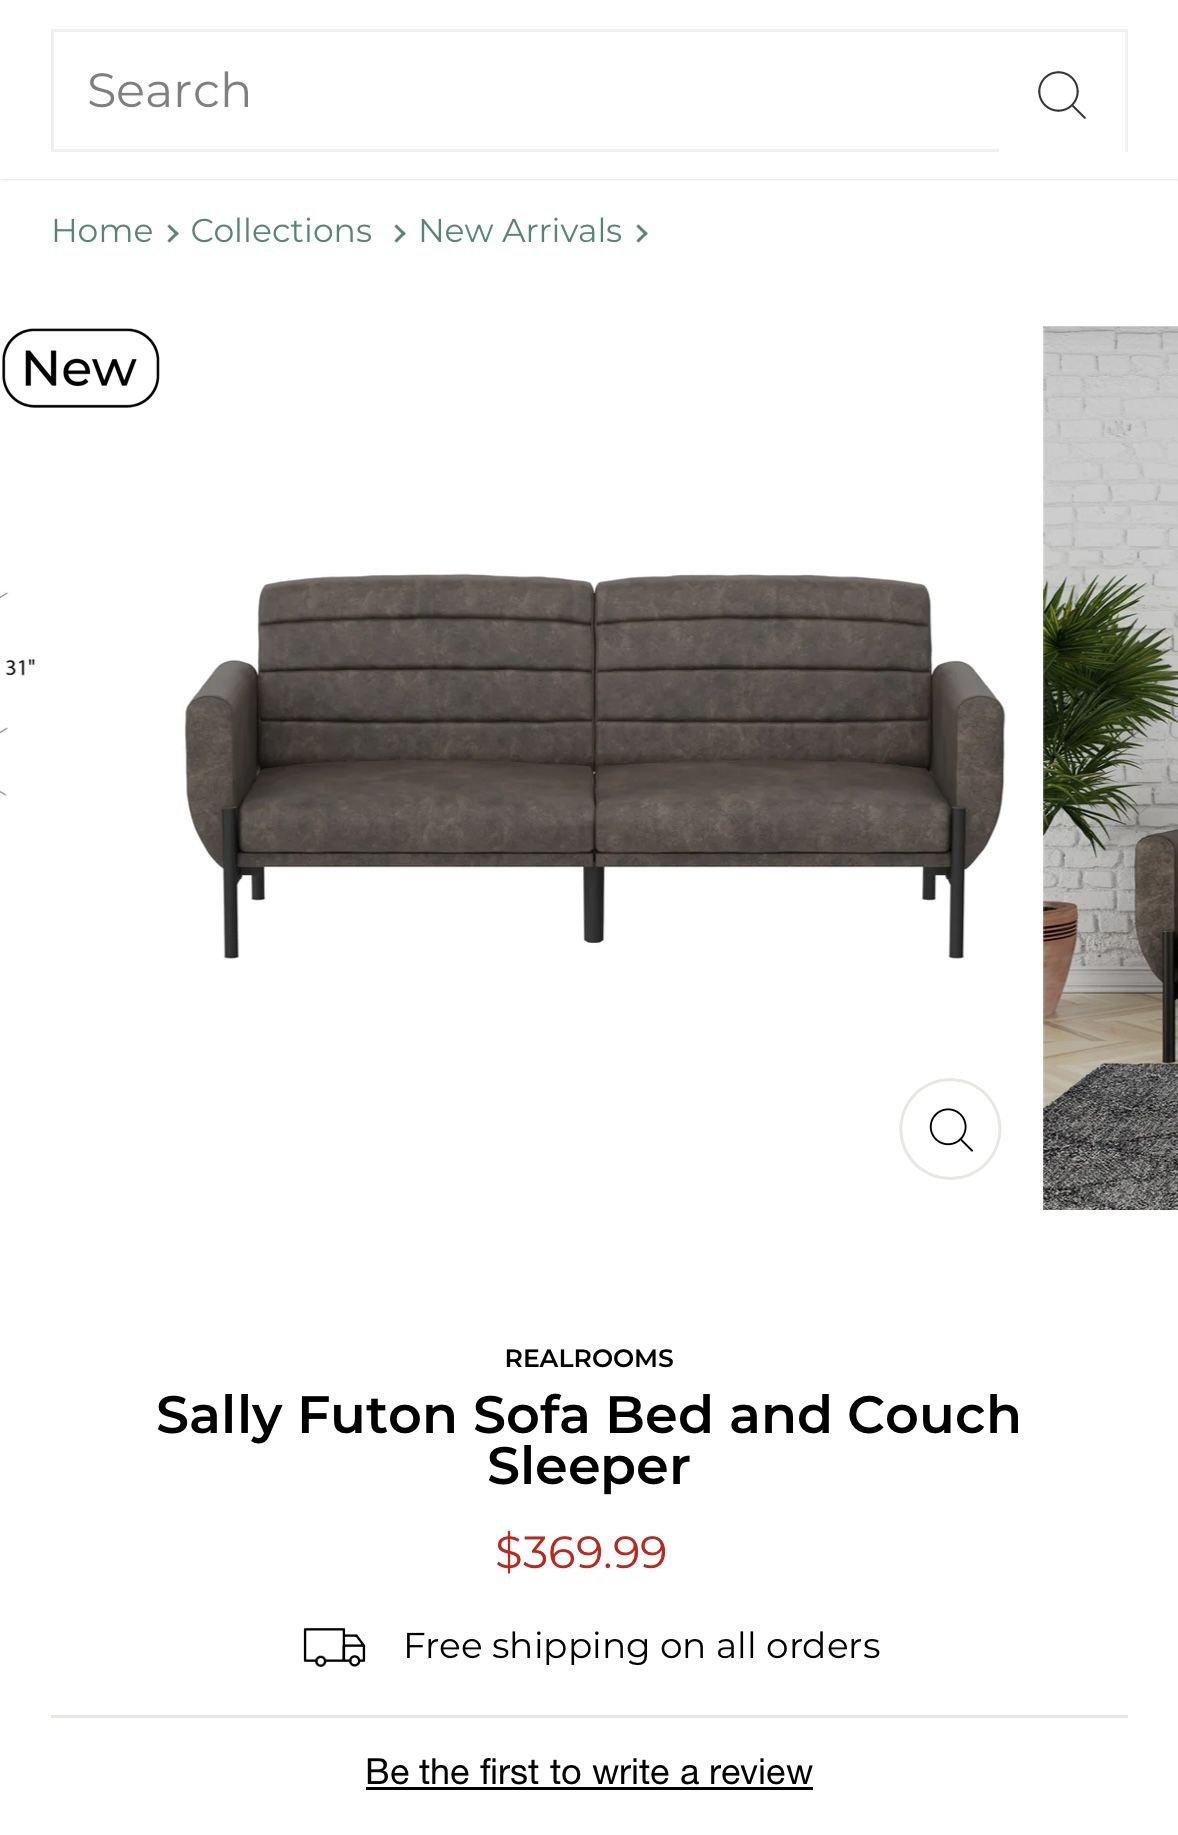 Sally Futon Sofa Bed And Couch Sleeper